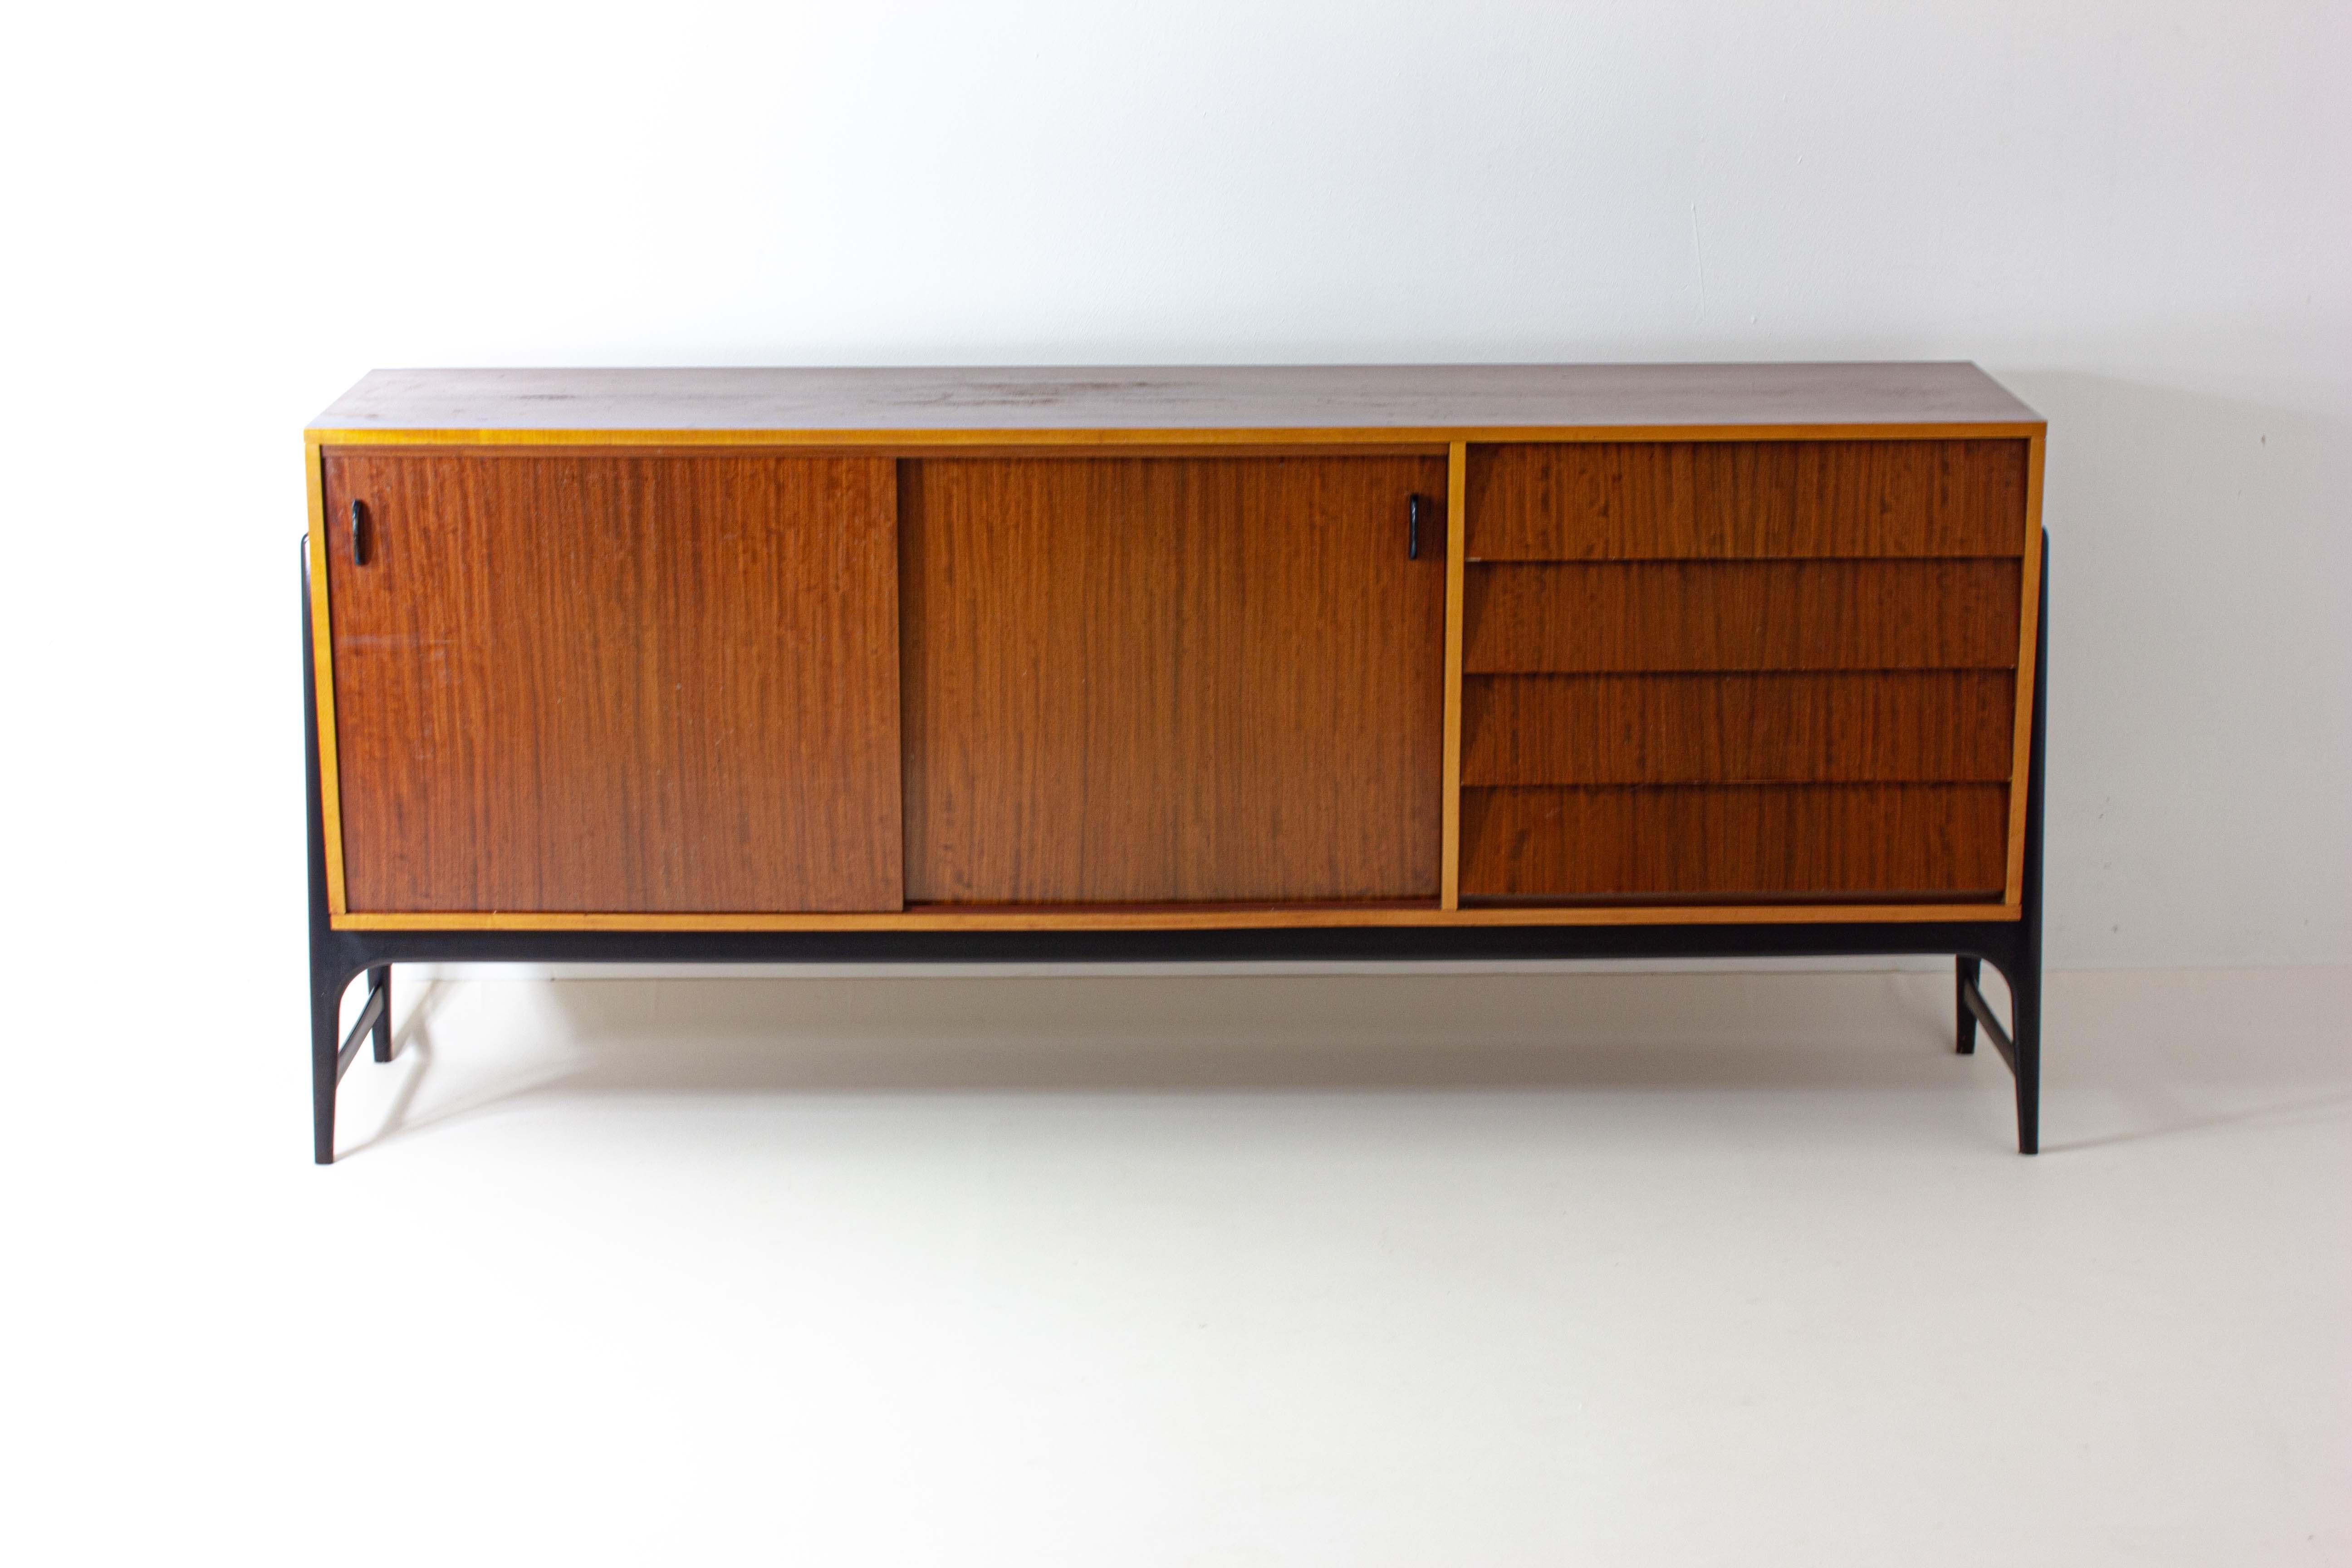 This rare sideboard is the epitome of true mid-century European design with its sleek lines in combination with organic forms. The natural materials make for an interesting play between the honey colored sycamore wood and the darker bubinga. Its